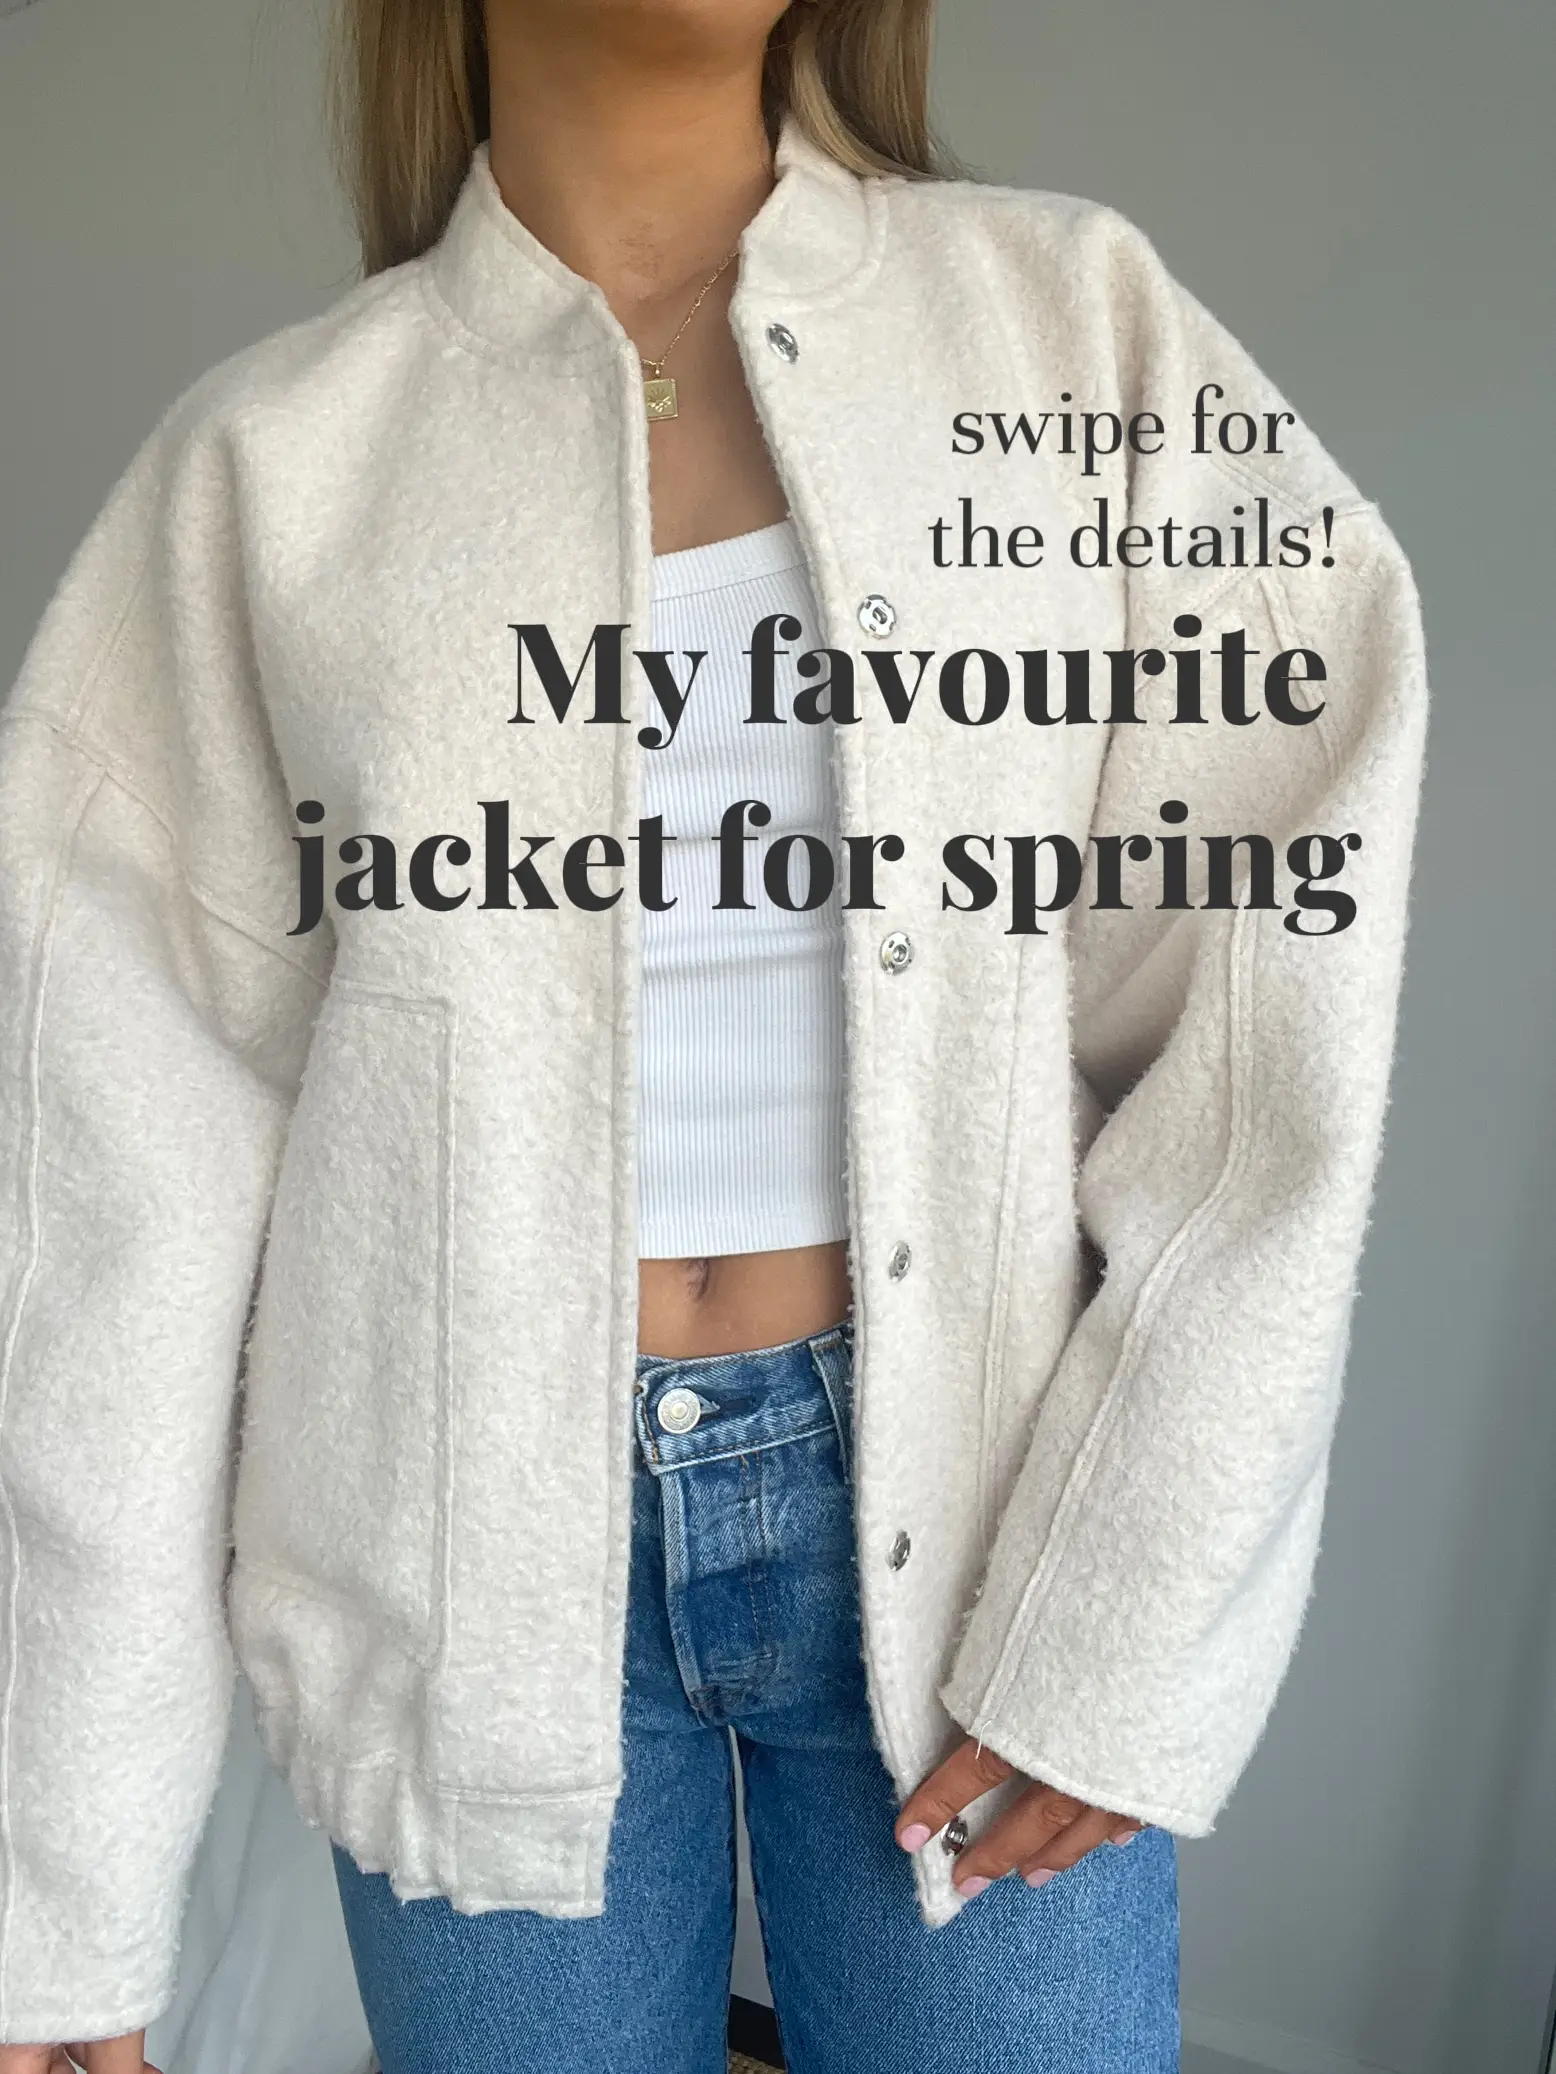 I've found the perfect spring jacket from Zara - it's going to